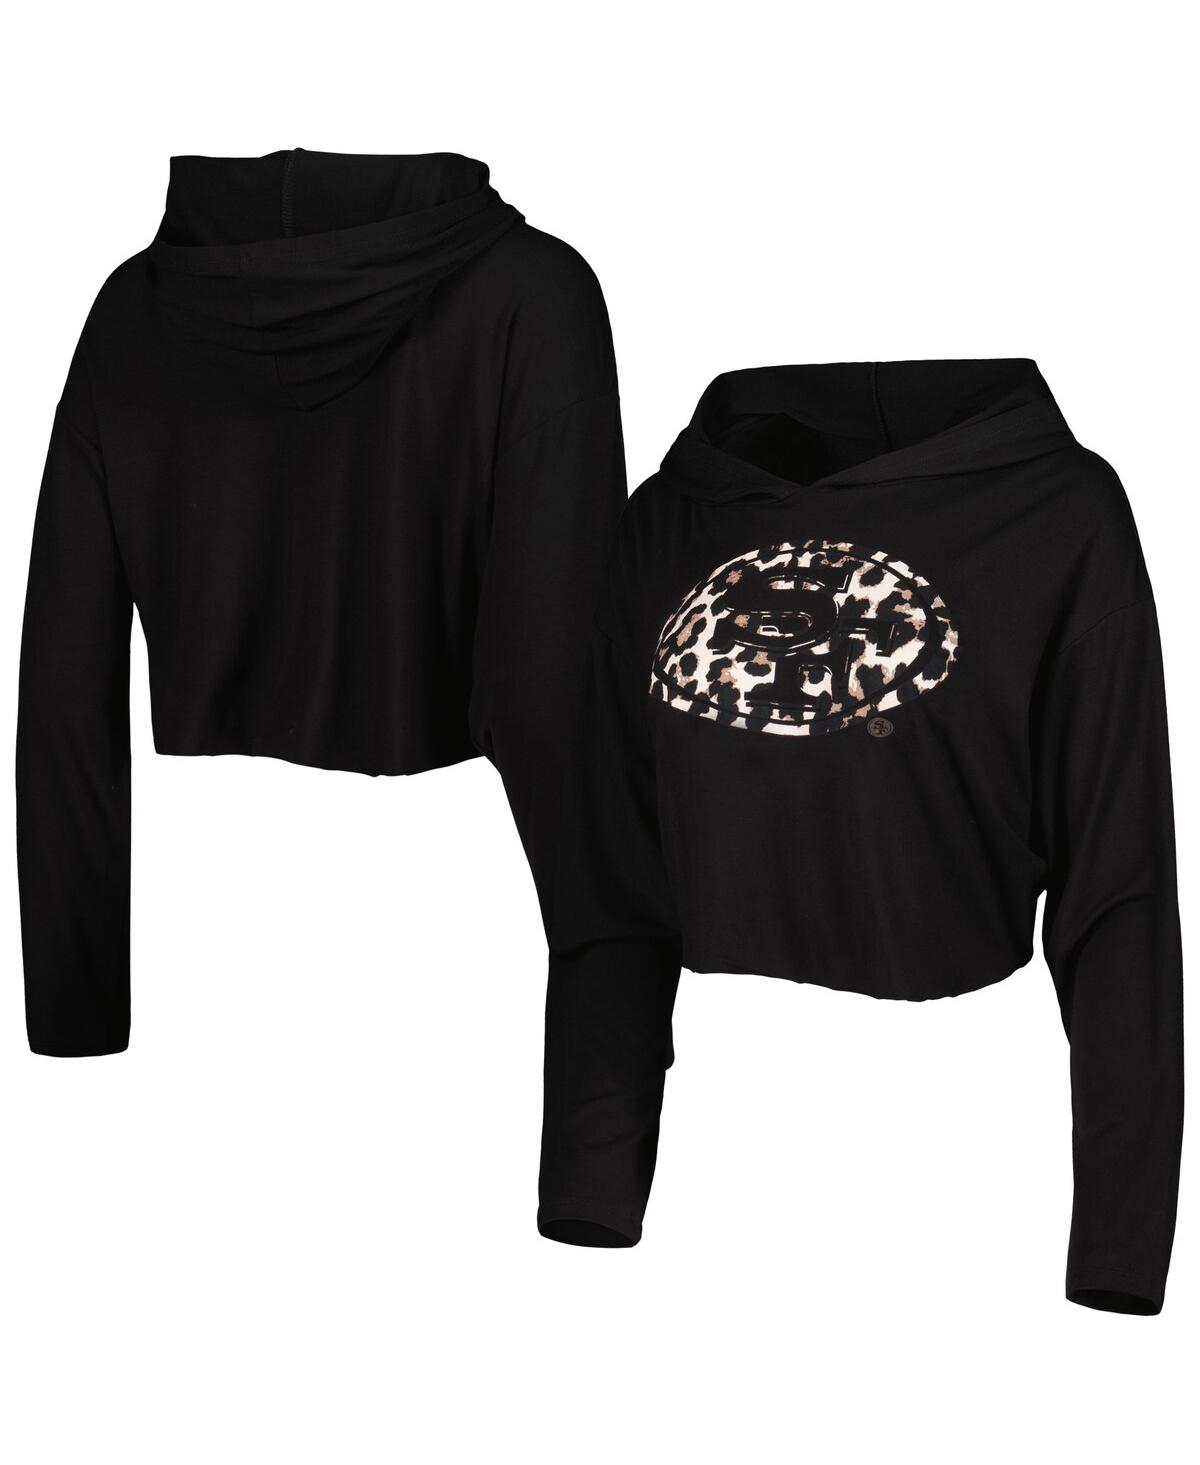 Women's Majestic Threads Black San Francisco 49ers Leopard Cropped Pullover Hoodie - Black